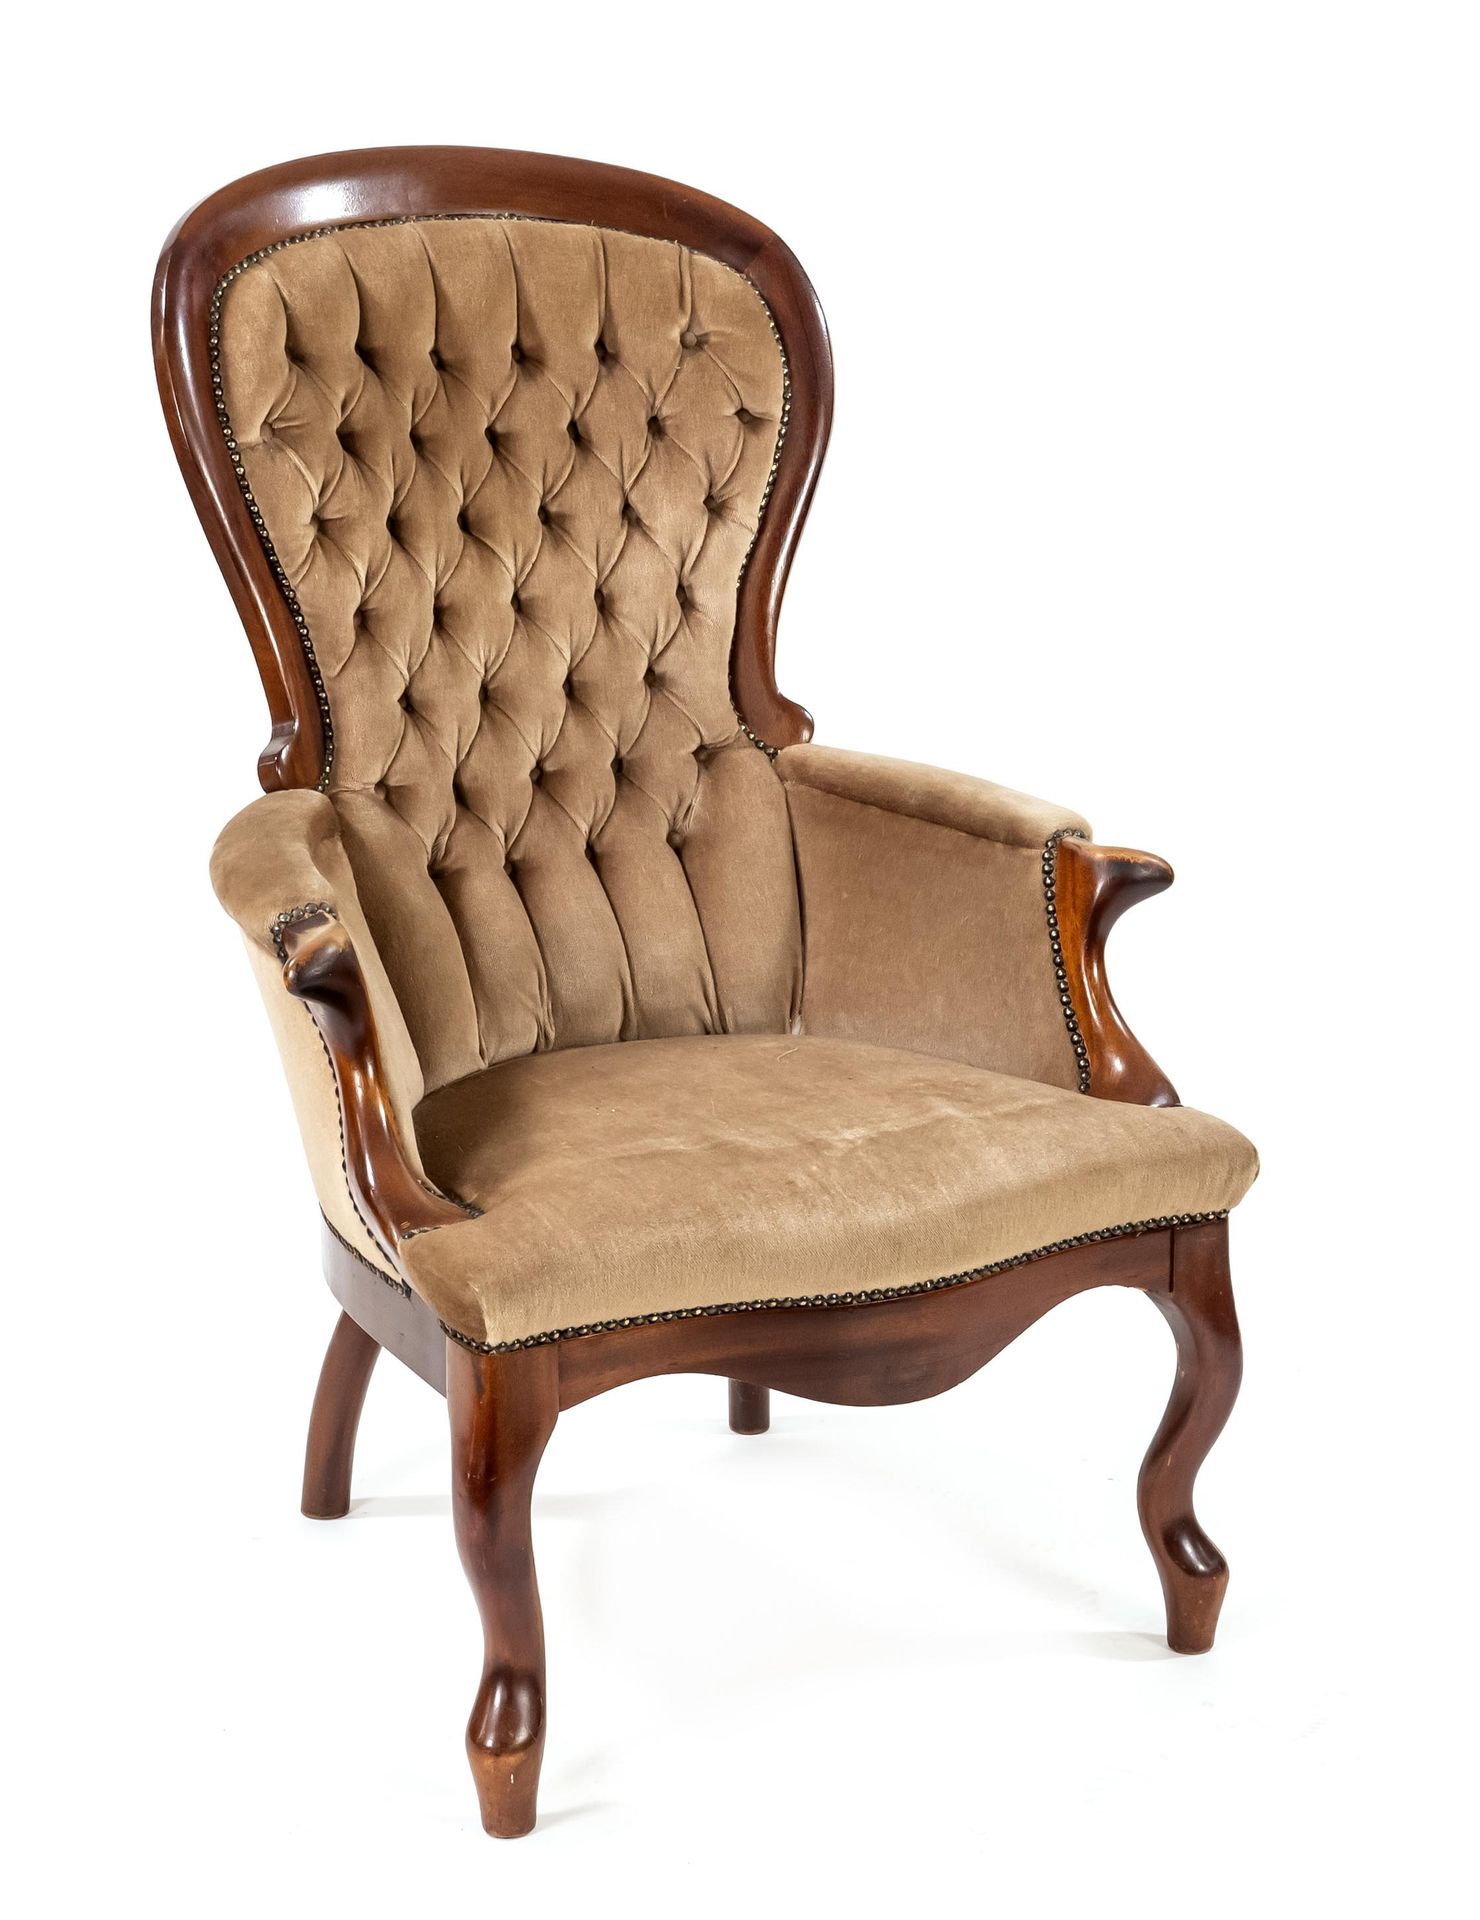 Null Armchair c. 1860, solid mahogany, curved frame, 111 x 74 x 80 cm.